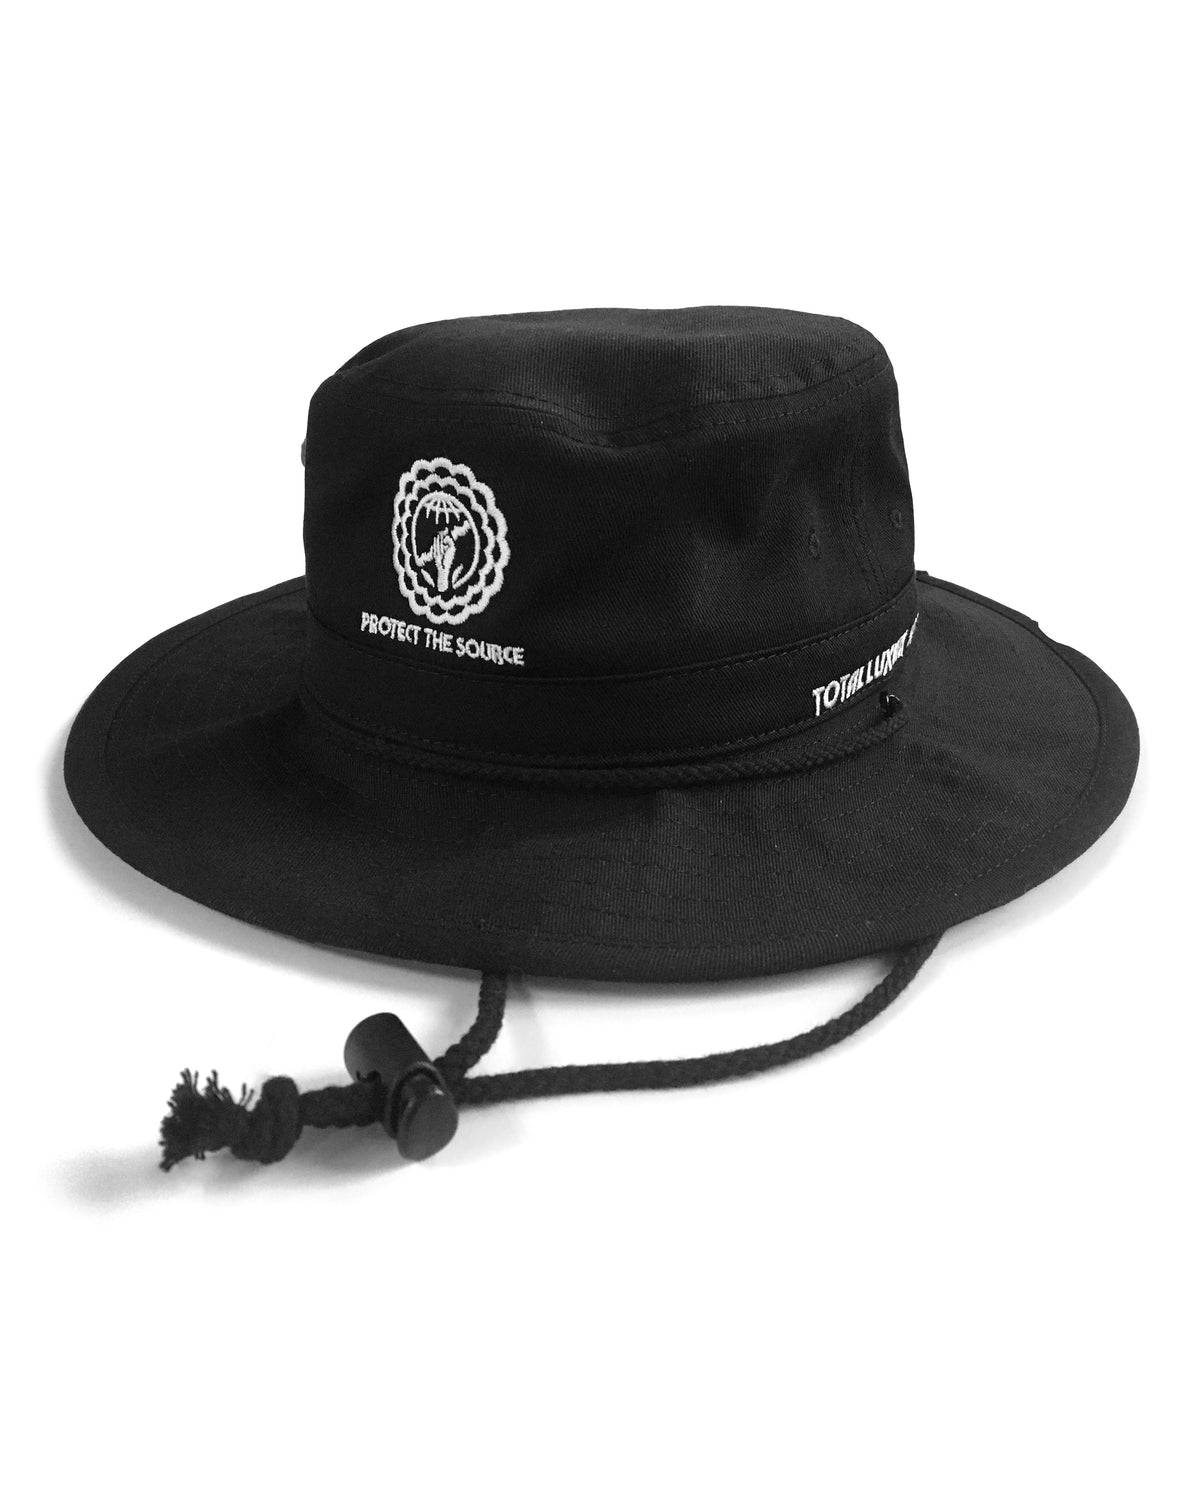 PROTECT THE SOURCE - RIVER HAT - BLACK